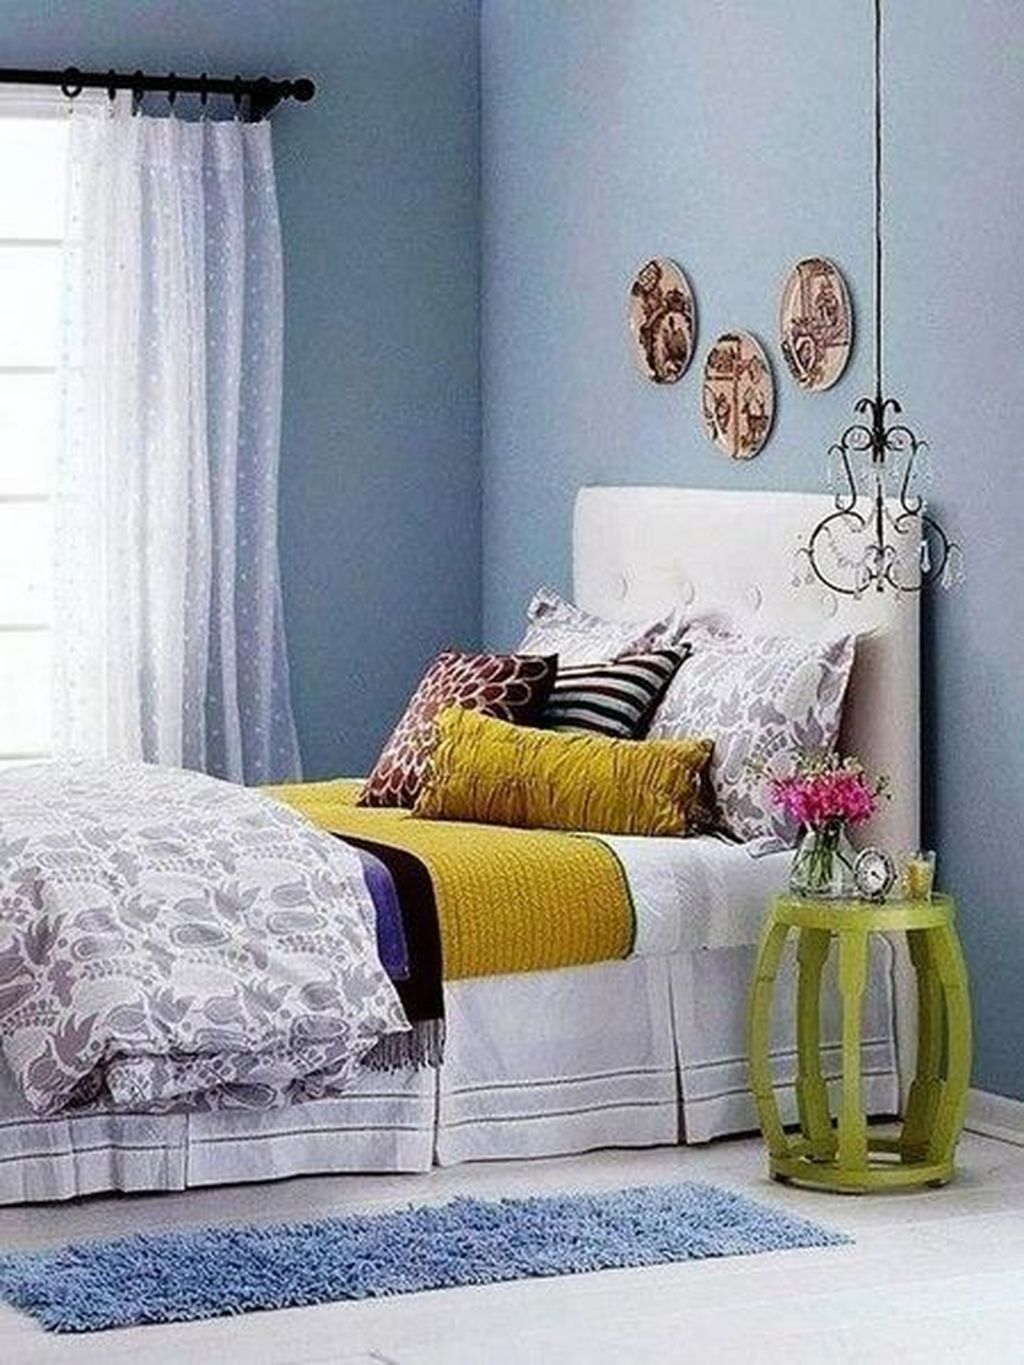 Small Bedroom Makeover Ideas On A Budget - Best Design Idea